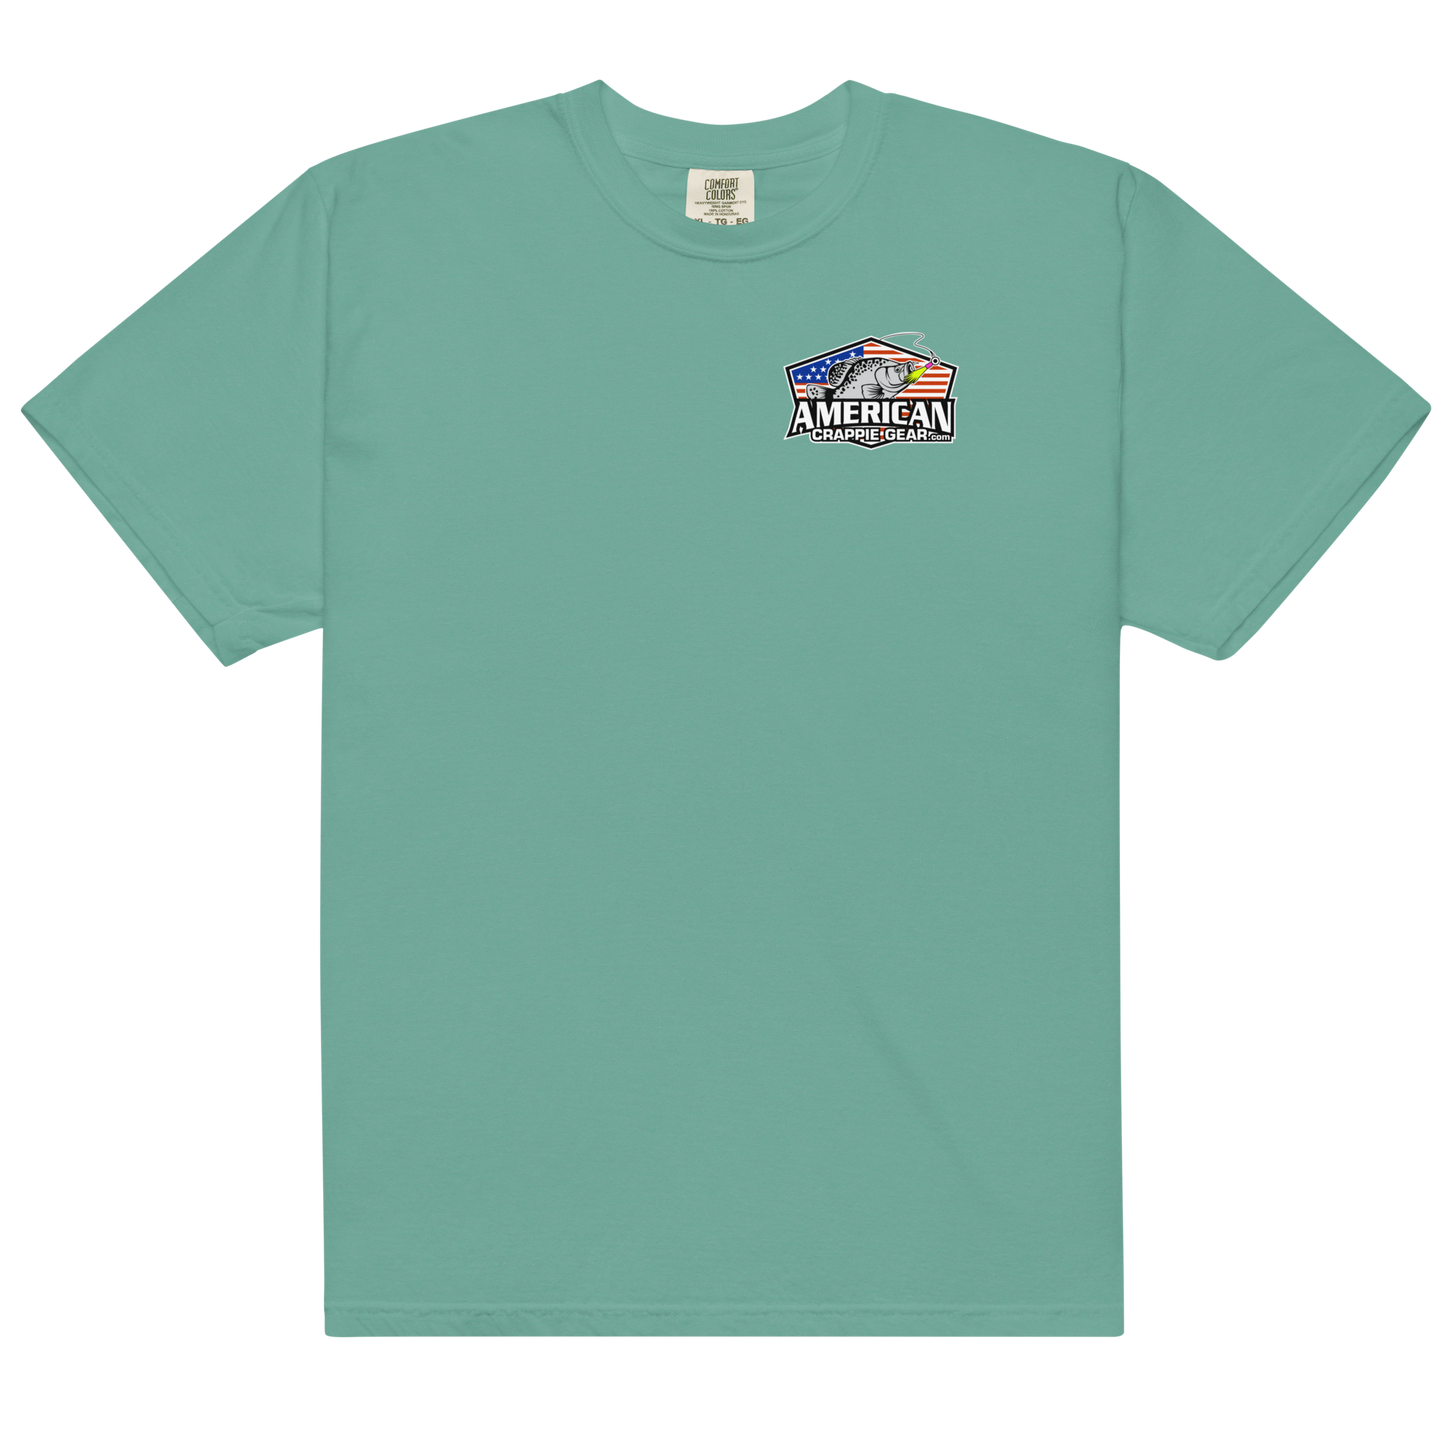 American Crappie Gear-Comfort Colors-Short Sleeve HeavyWeight T-Shirt-15 Color Options!